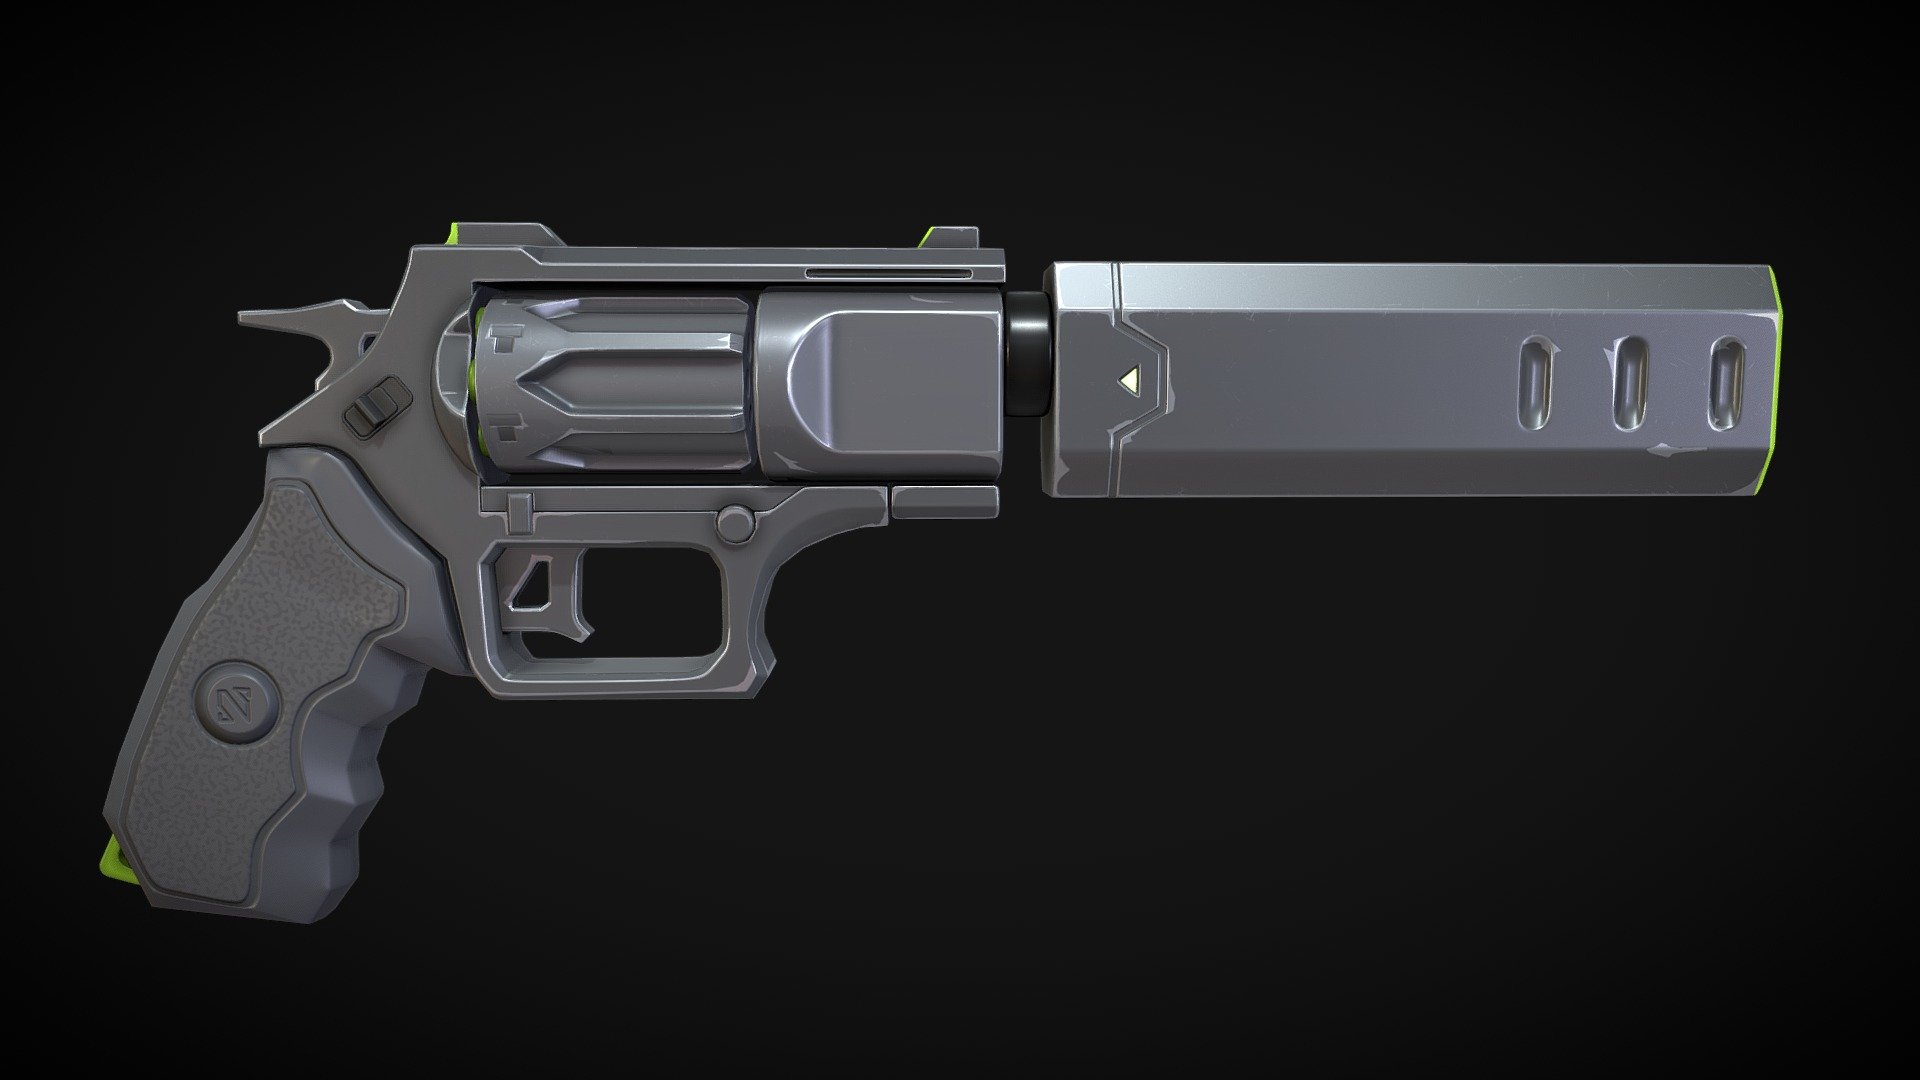 Since at the new studio i had to switch to Maya after 8 years of Max, i used this awesome concept to make some practice with the new software

https://www.artstation.com/artwork/0nag98

I decided to do a real time version since I was at it - SciFi Revolver - 3D model by macridil (Paolo Crimaldi) (@macridil) 3d model